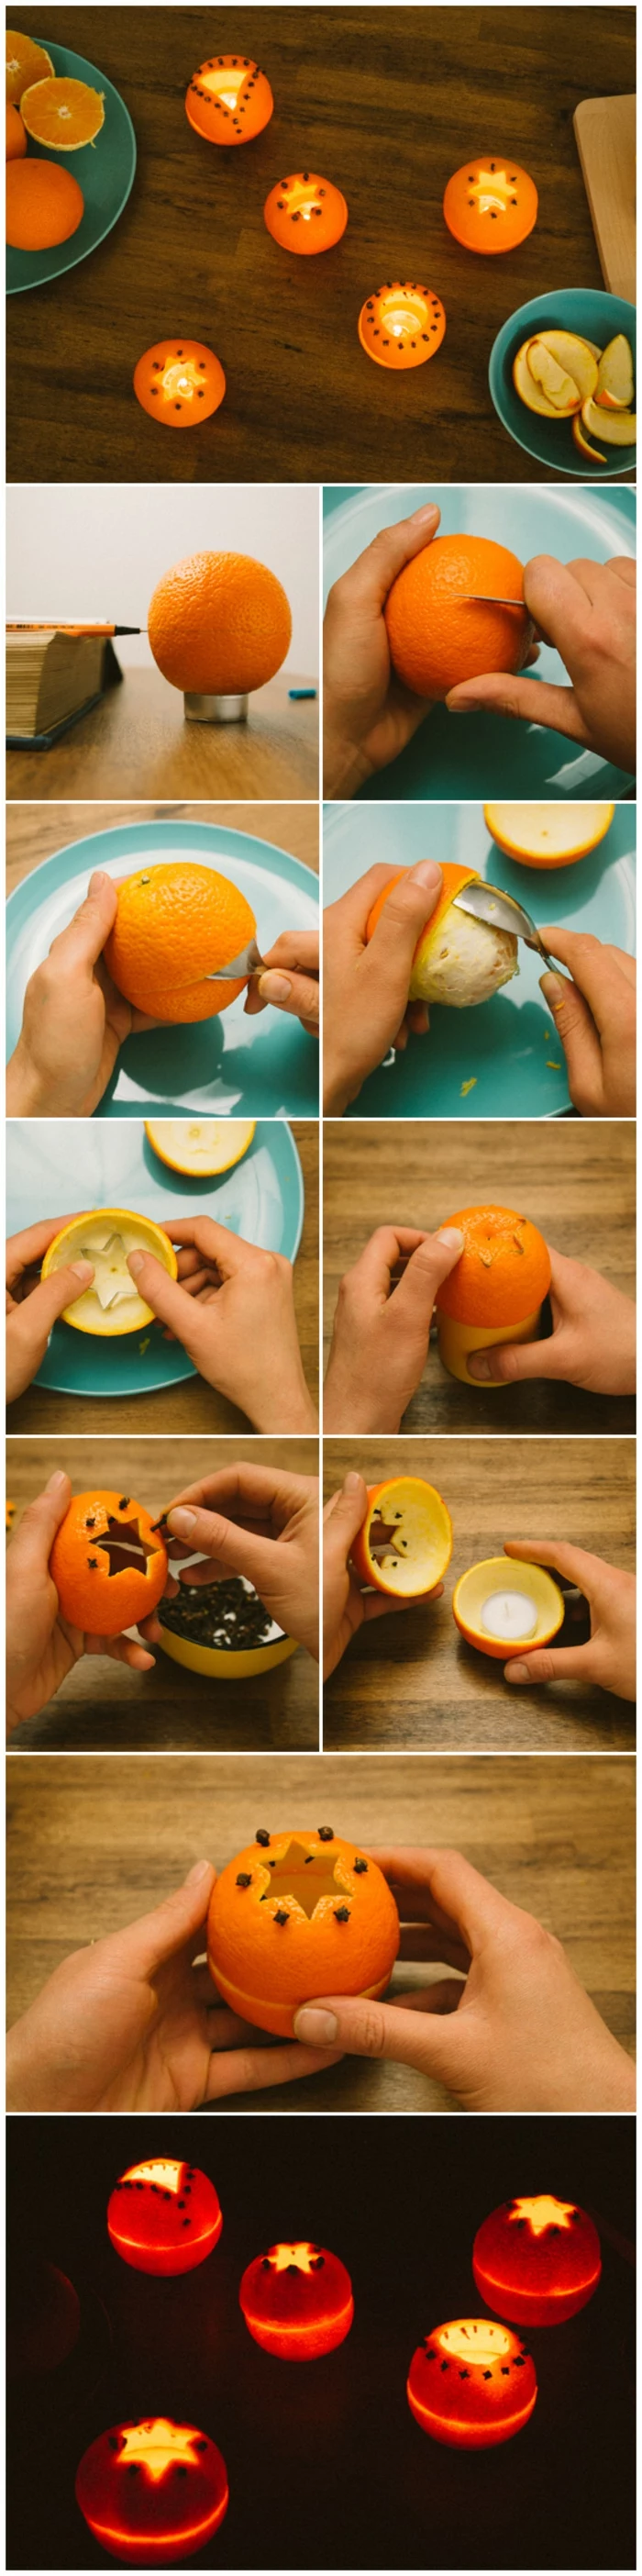 several lanterns made from hollowed oranges, a book and pen next to an orange, hands holding peeling and carving orange, hands cutting orange peel with cookie cutter and decorating it with spices, glowing decorated orange lanterns